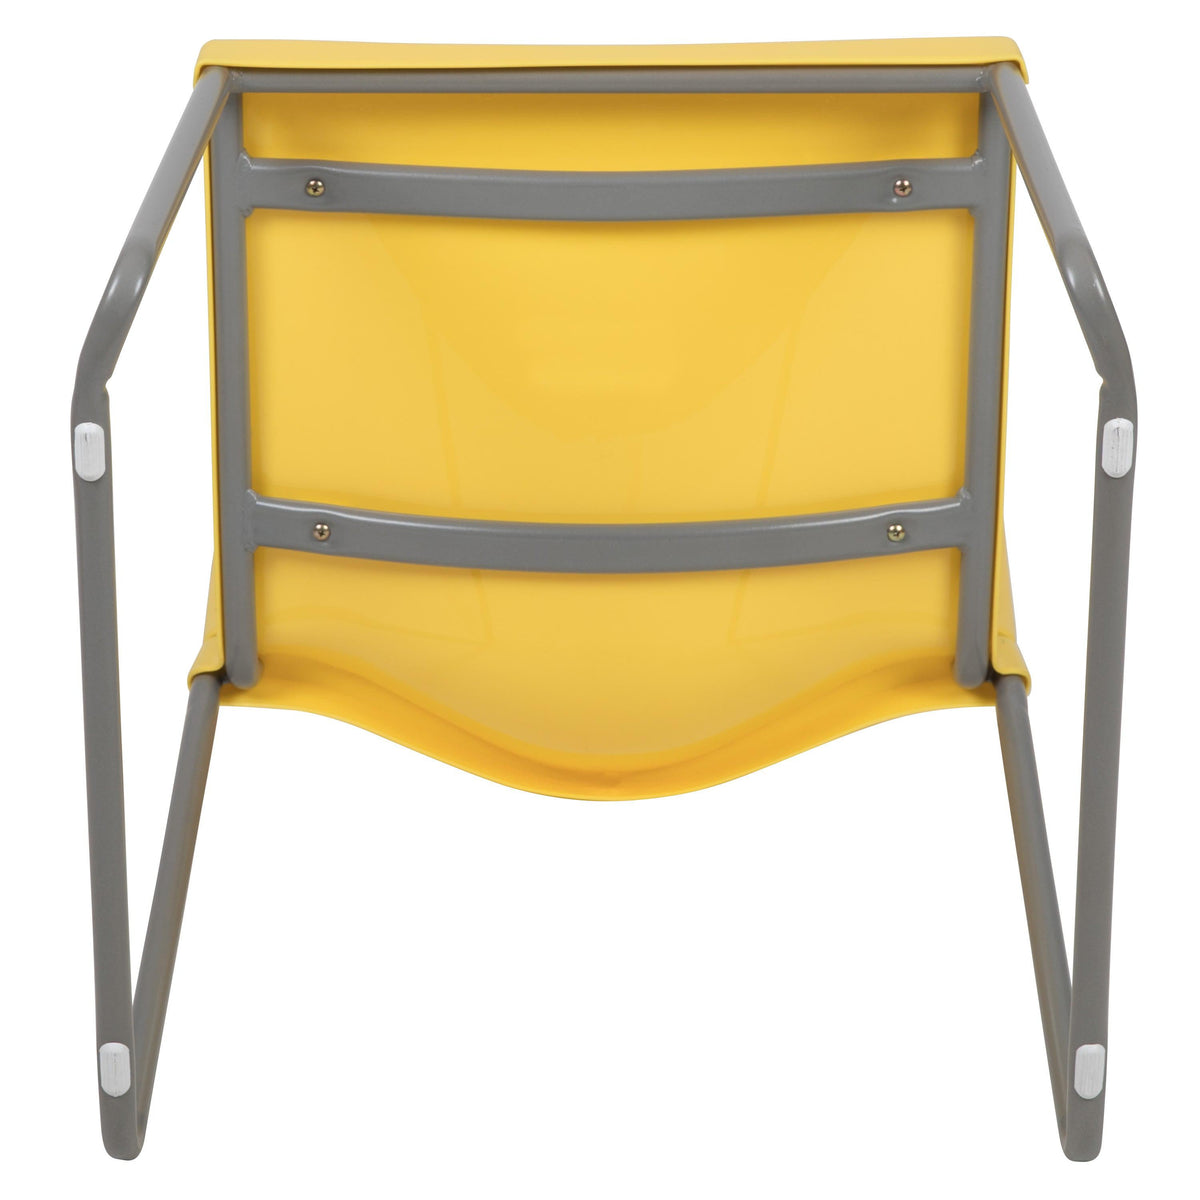 Yellow |#| Home and Office Guest Chair Yellow Full Back Contoured Sled Base Stack Chair